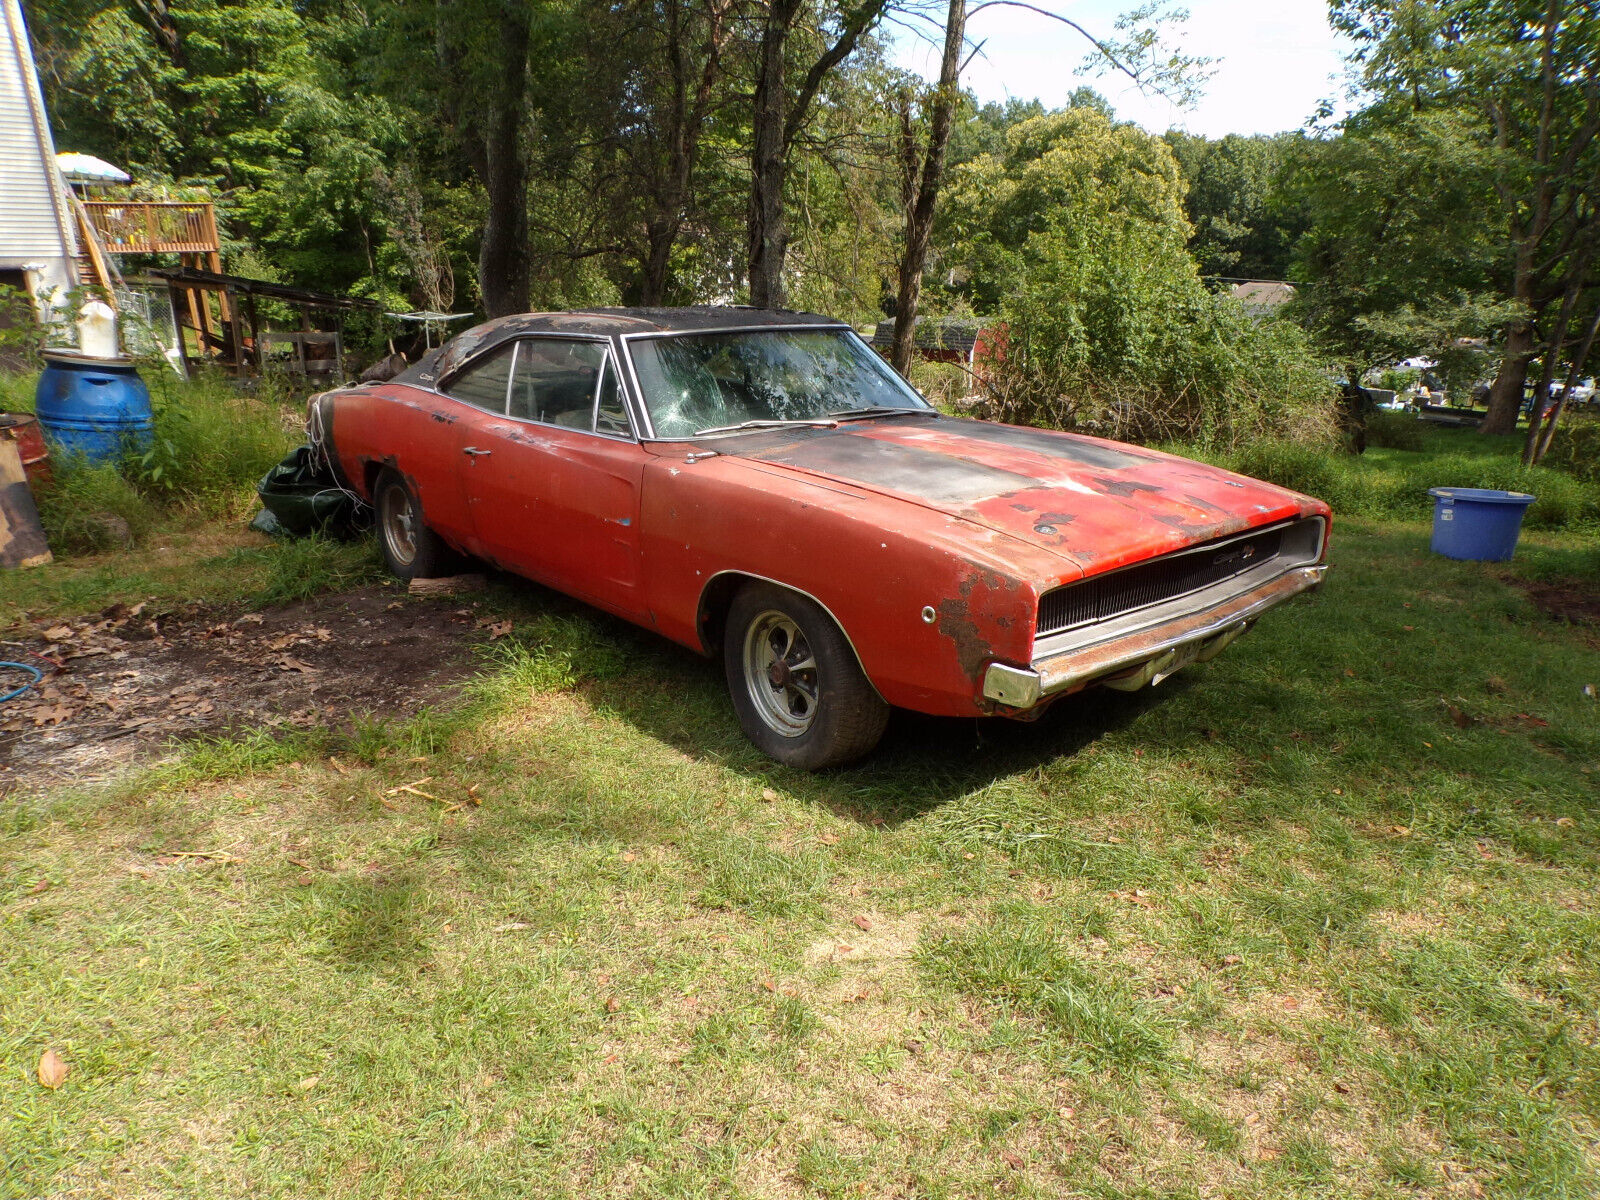 1969 Dodge Charger Project Update: Understanding That Better Is a Relative  Term